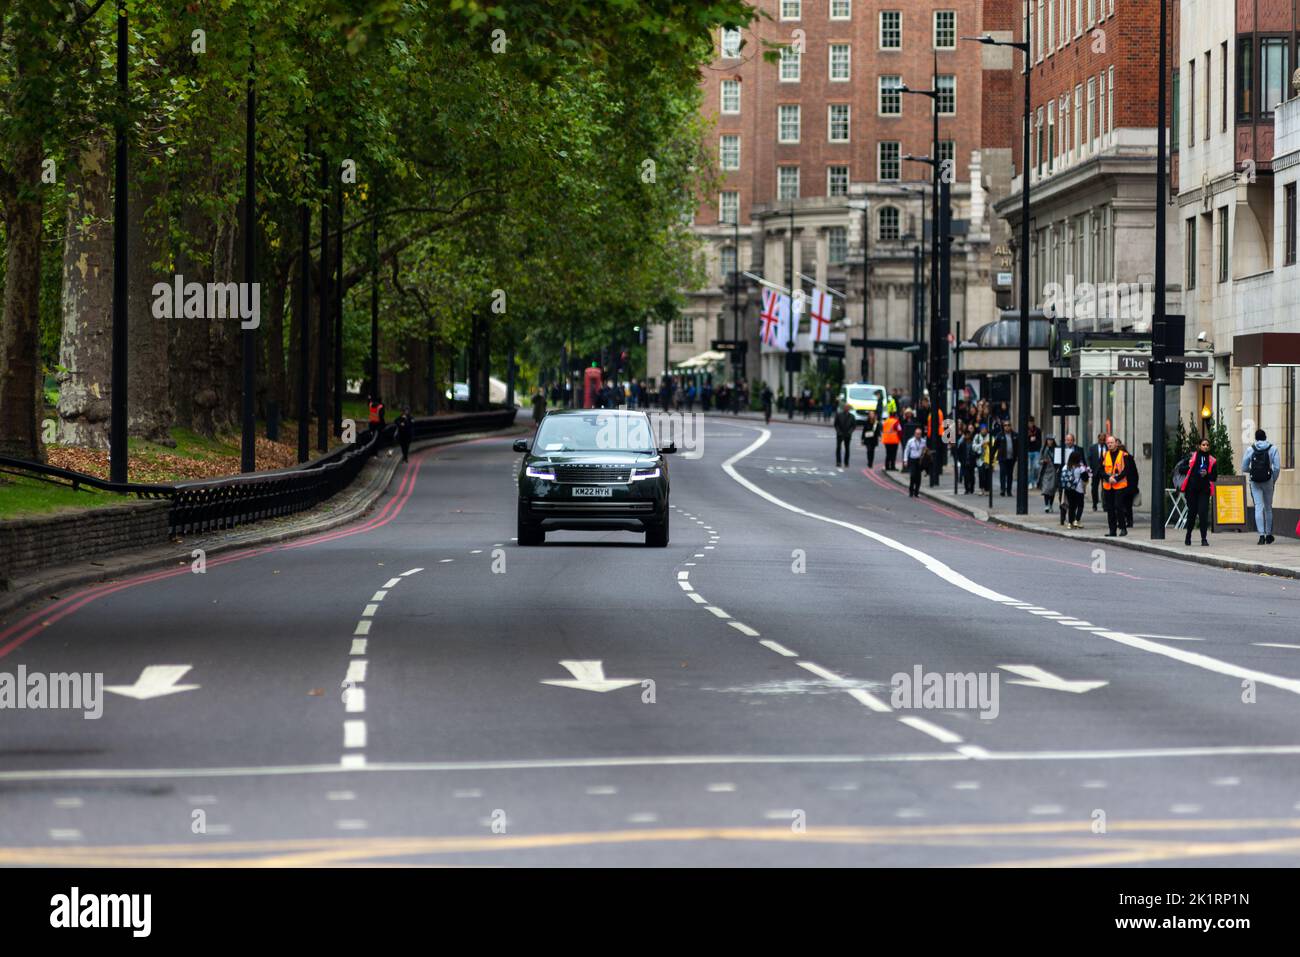 London, UK, Monday 19th September 2022. Funeral of Queen Elizabeth II. Park Lane is closed to non-official traffic as people flock to Hyde Park. Stock Photo